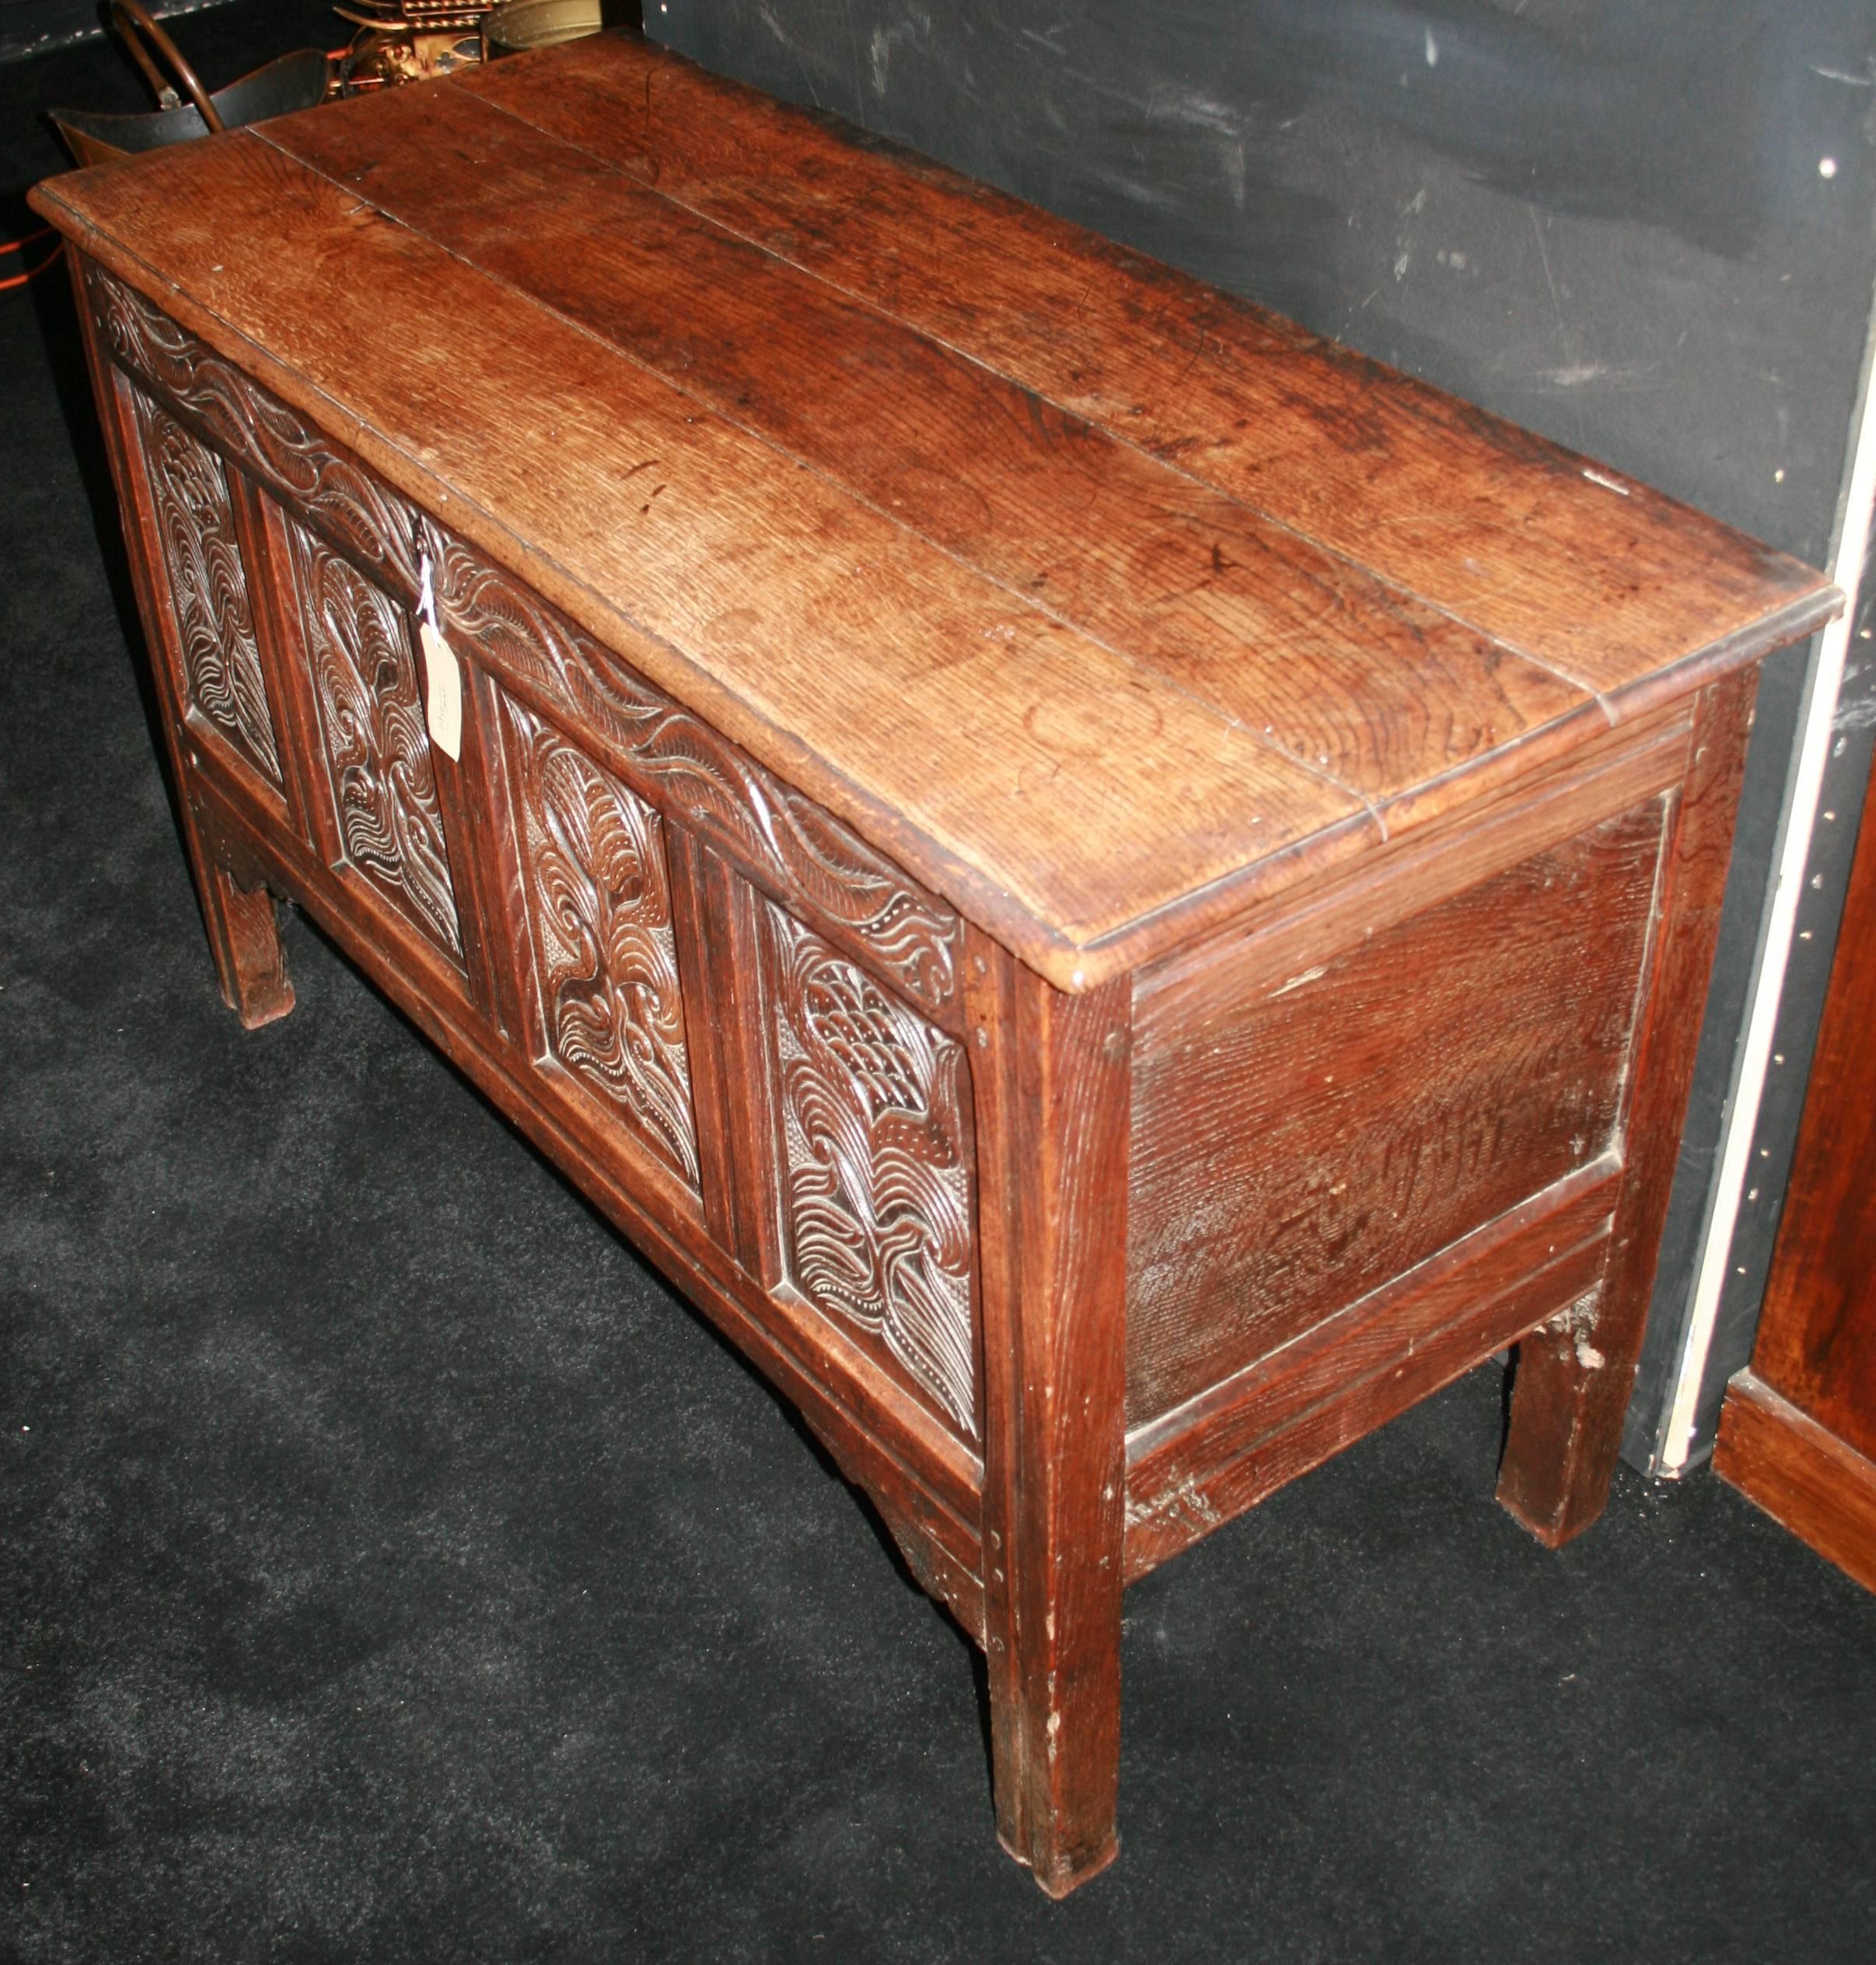 Measures:

Width 126 cm 49 1/2 in.
Depth 54 cm 21 1/4 in.
Height 75 cm 29 1/2 in.

Period 17th century, Charles II.
Wood oak.
Condition very nice original condition.

Lovely period coffer, circa 1670.

Carved oak.

Four panel plank